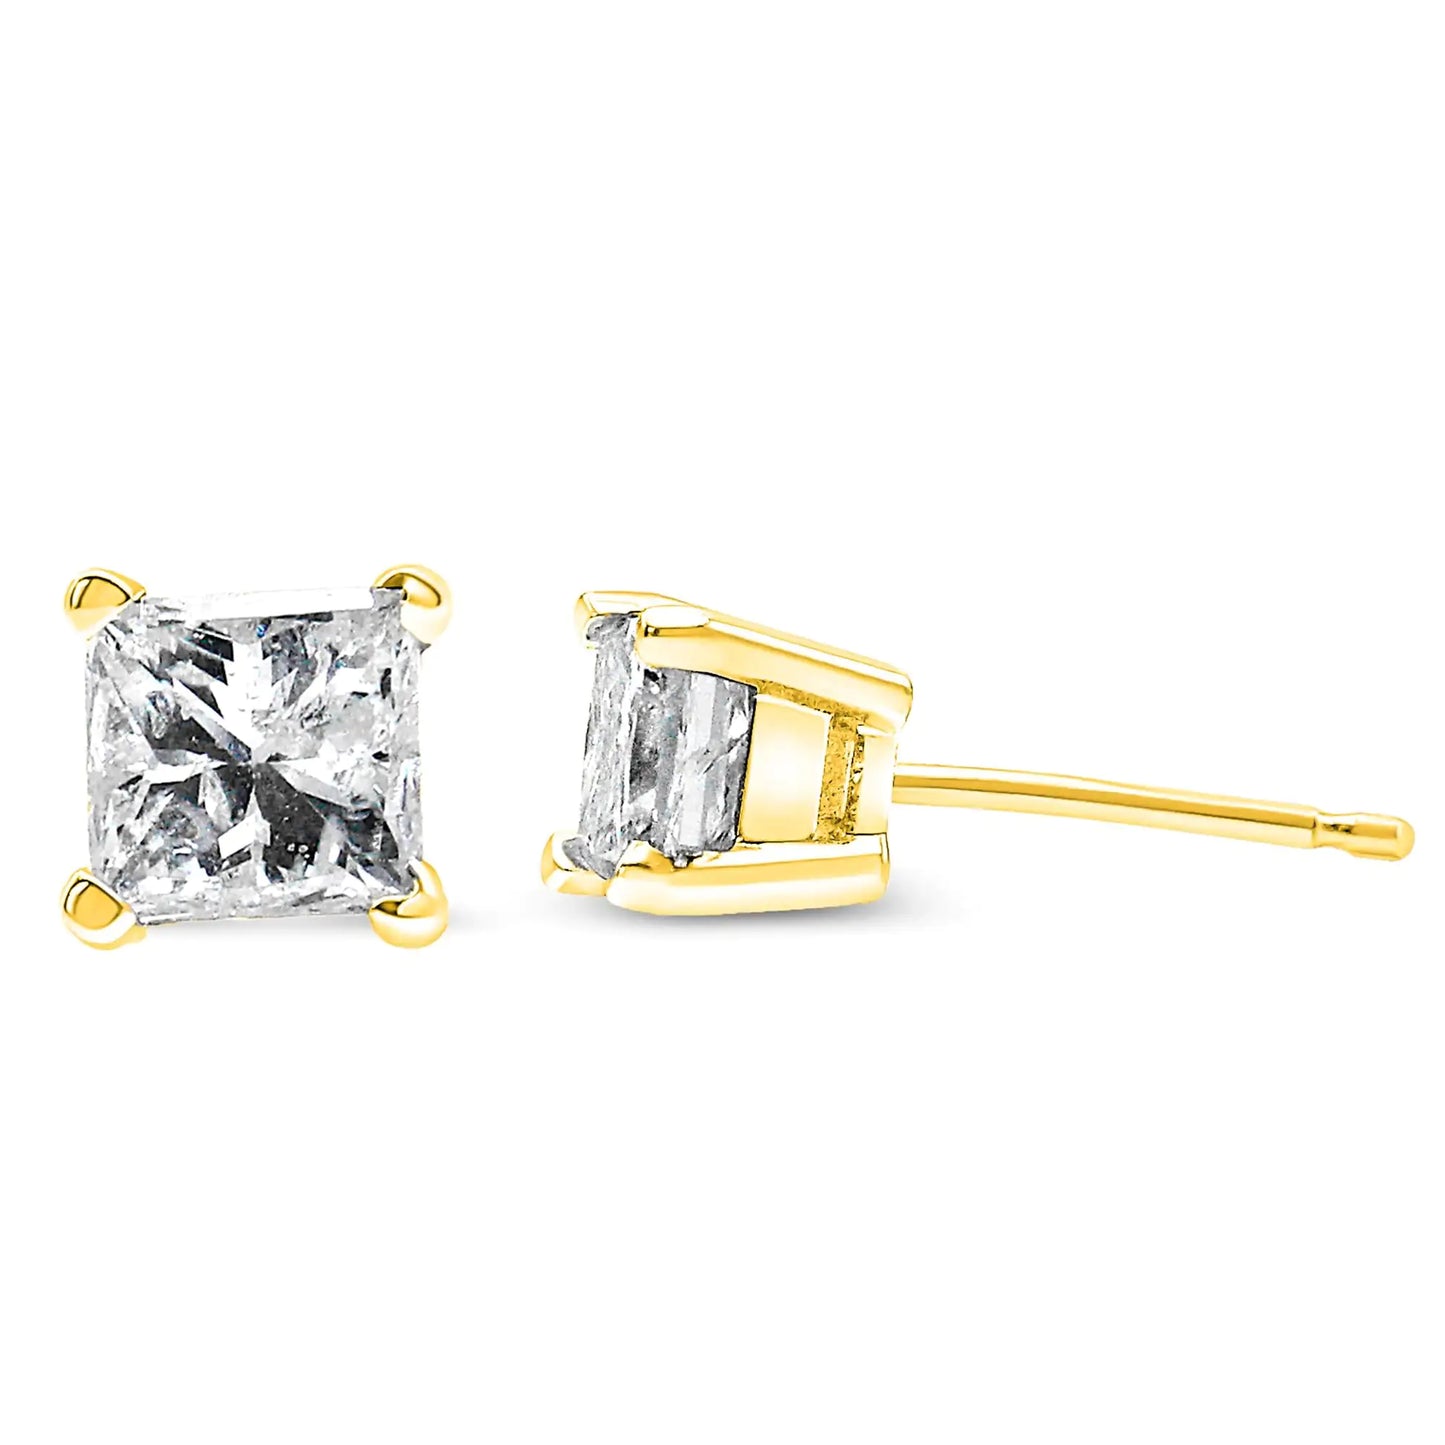 AGS Certified 1/2 Cttw Princess-Cut Square Diamond 4-Prong Solitaire Stud Earrings in 14K Yellow Gold (N-O Color, VS1-VS2 Clarity)